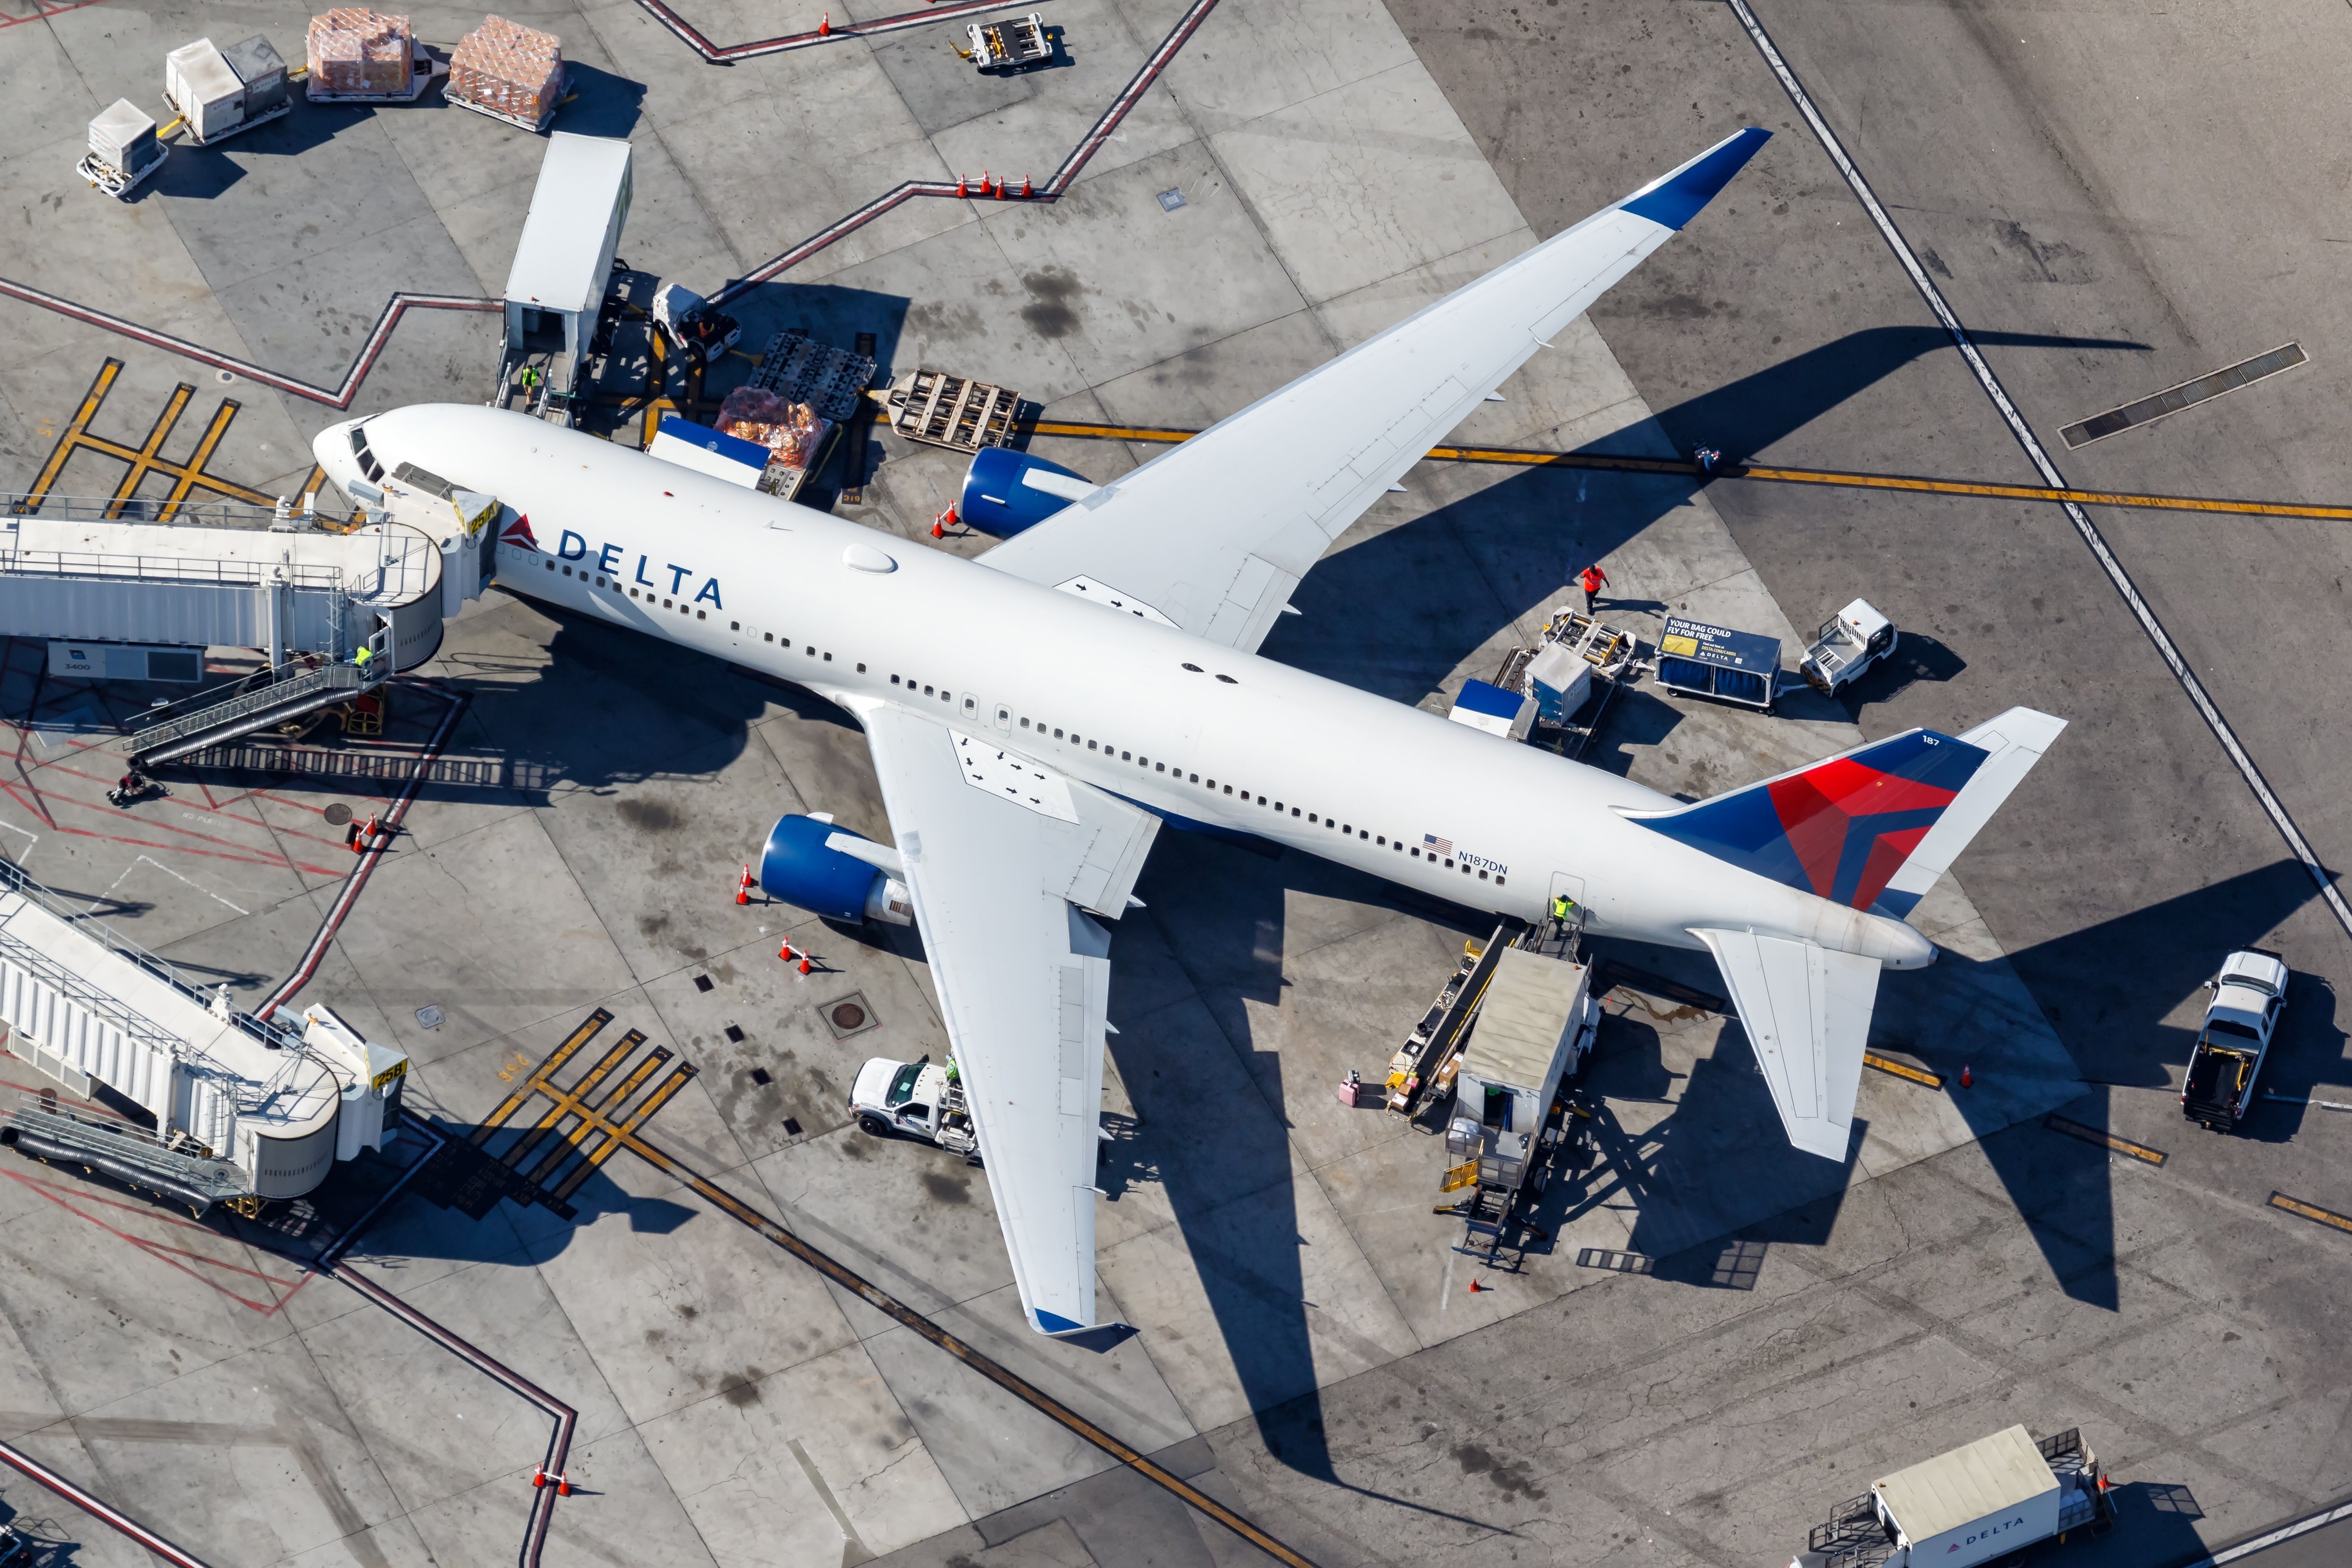 Delta on stand at LAX